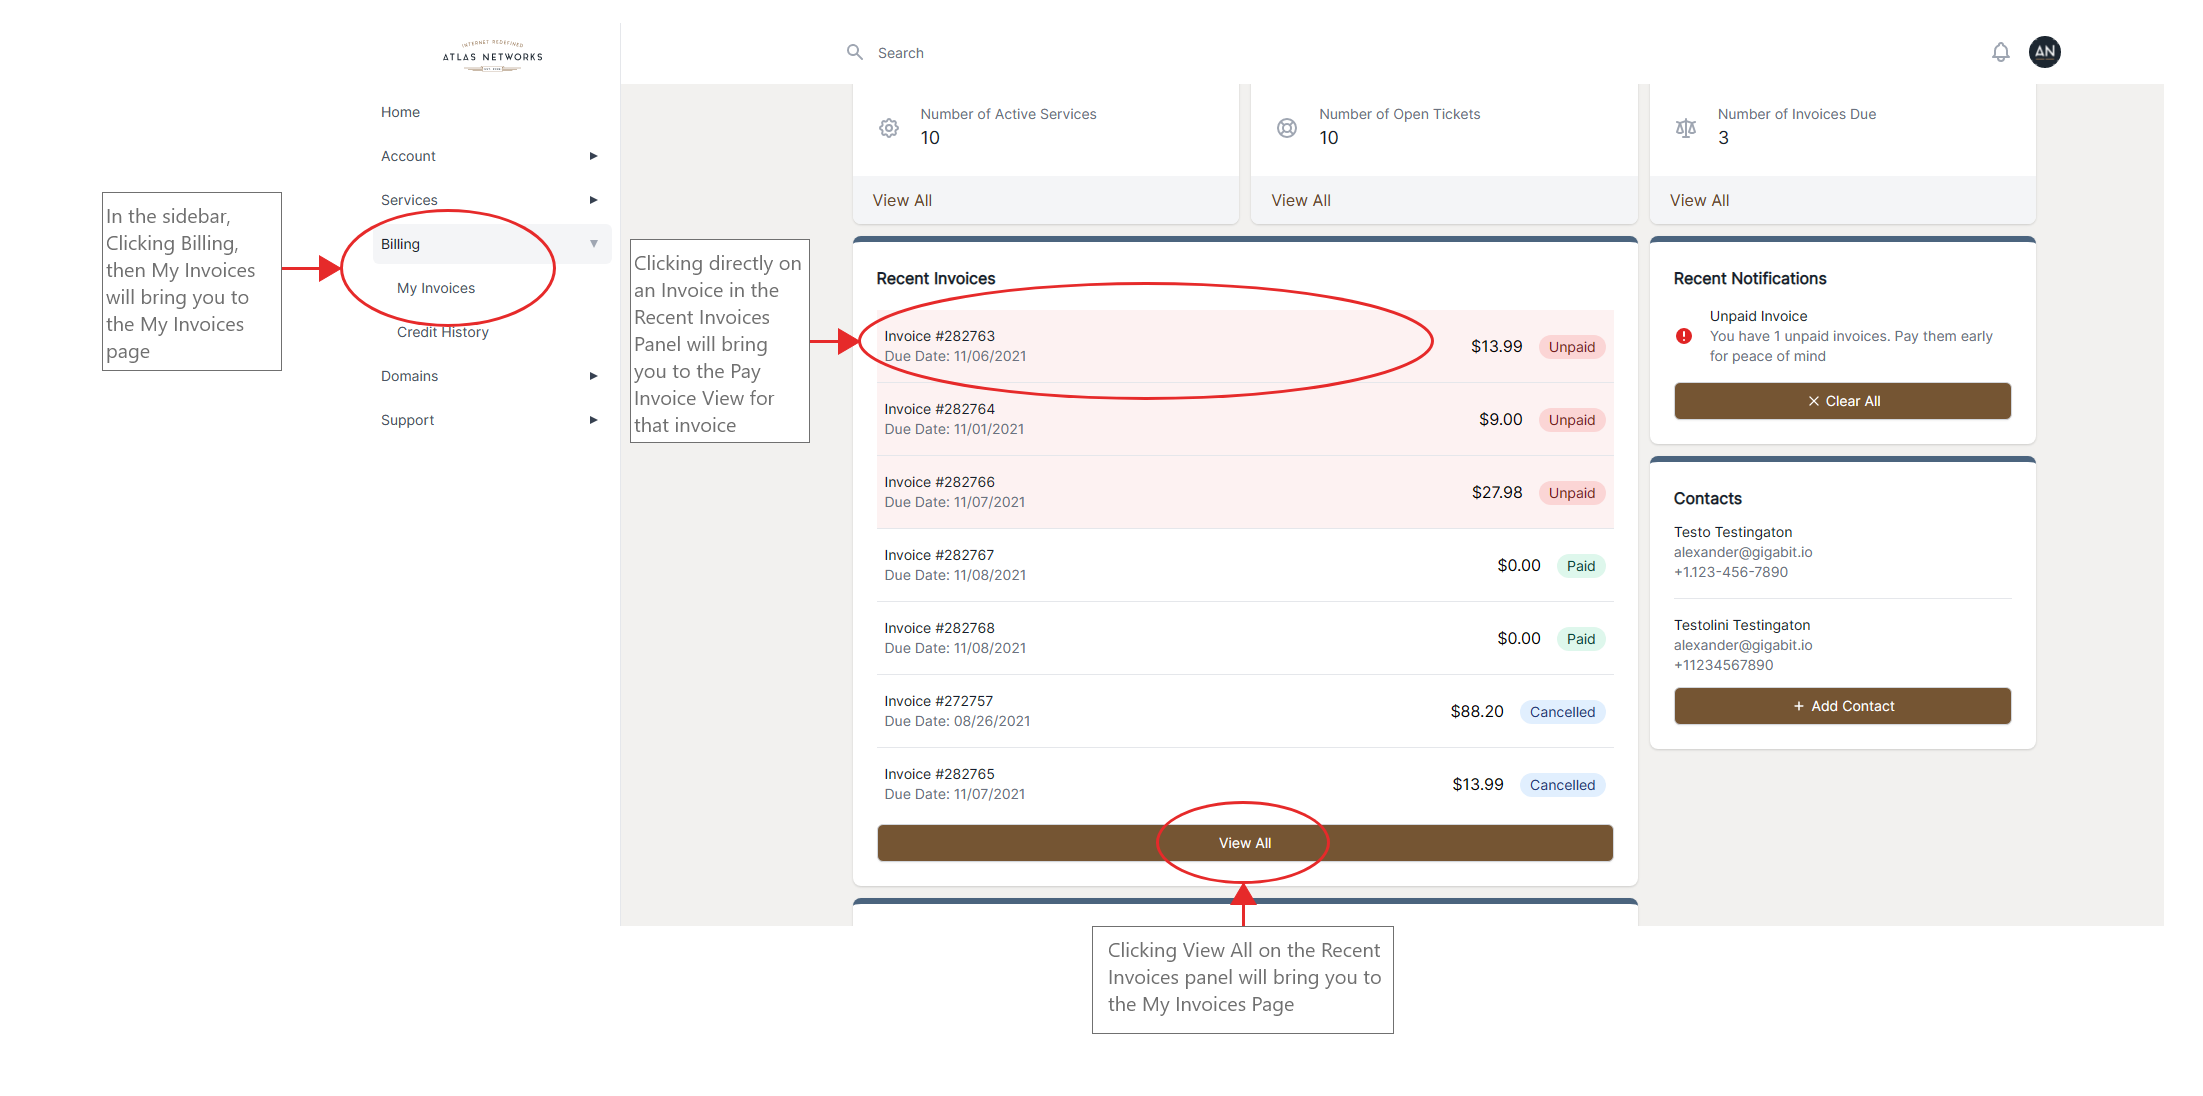 Diagram showing how to get to an invoice in the Customer Portal